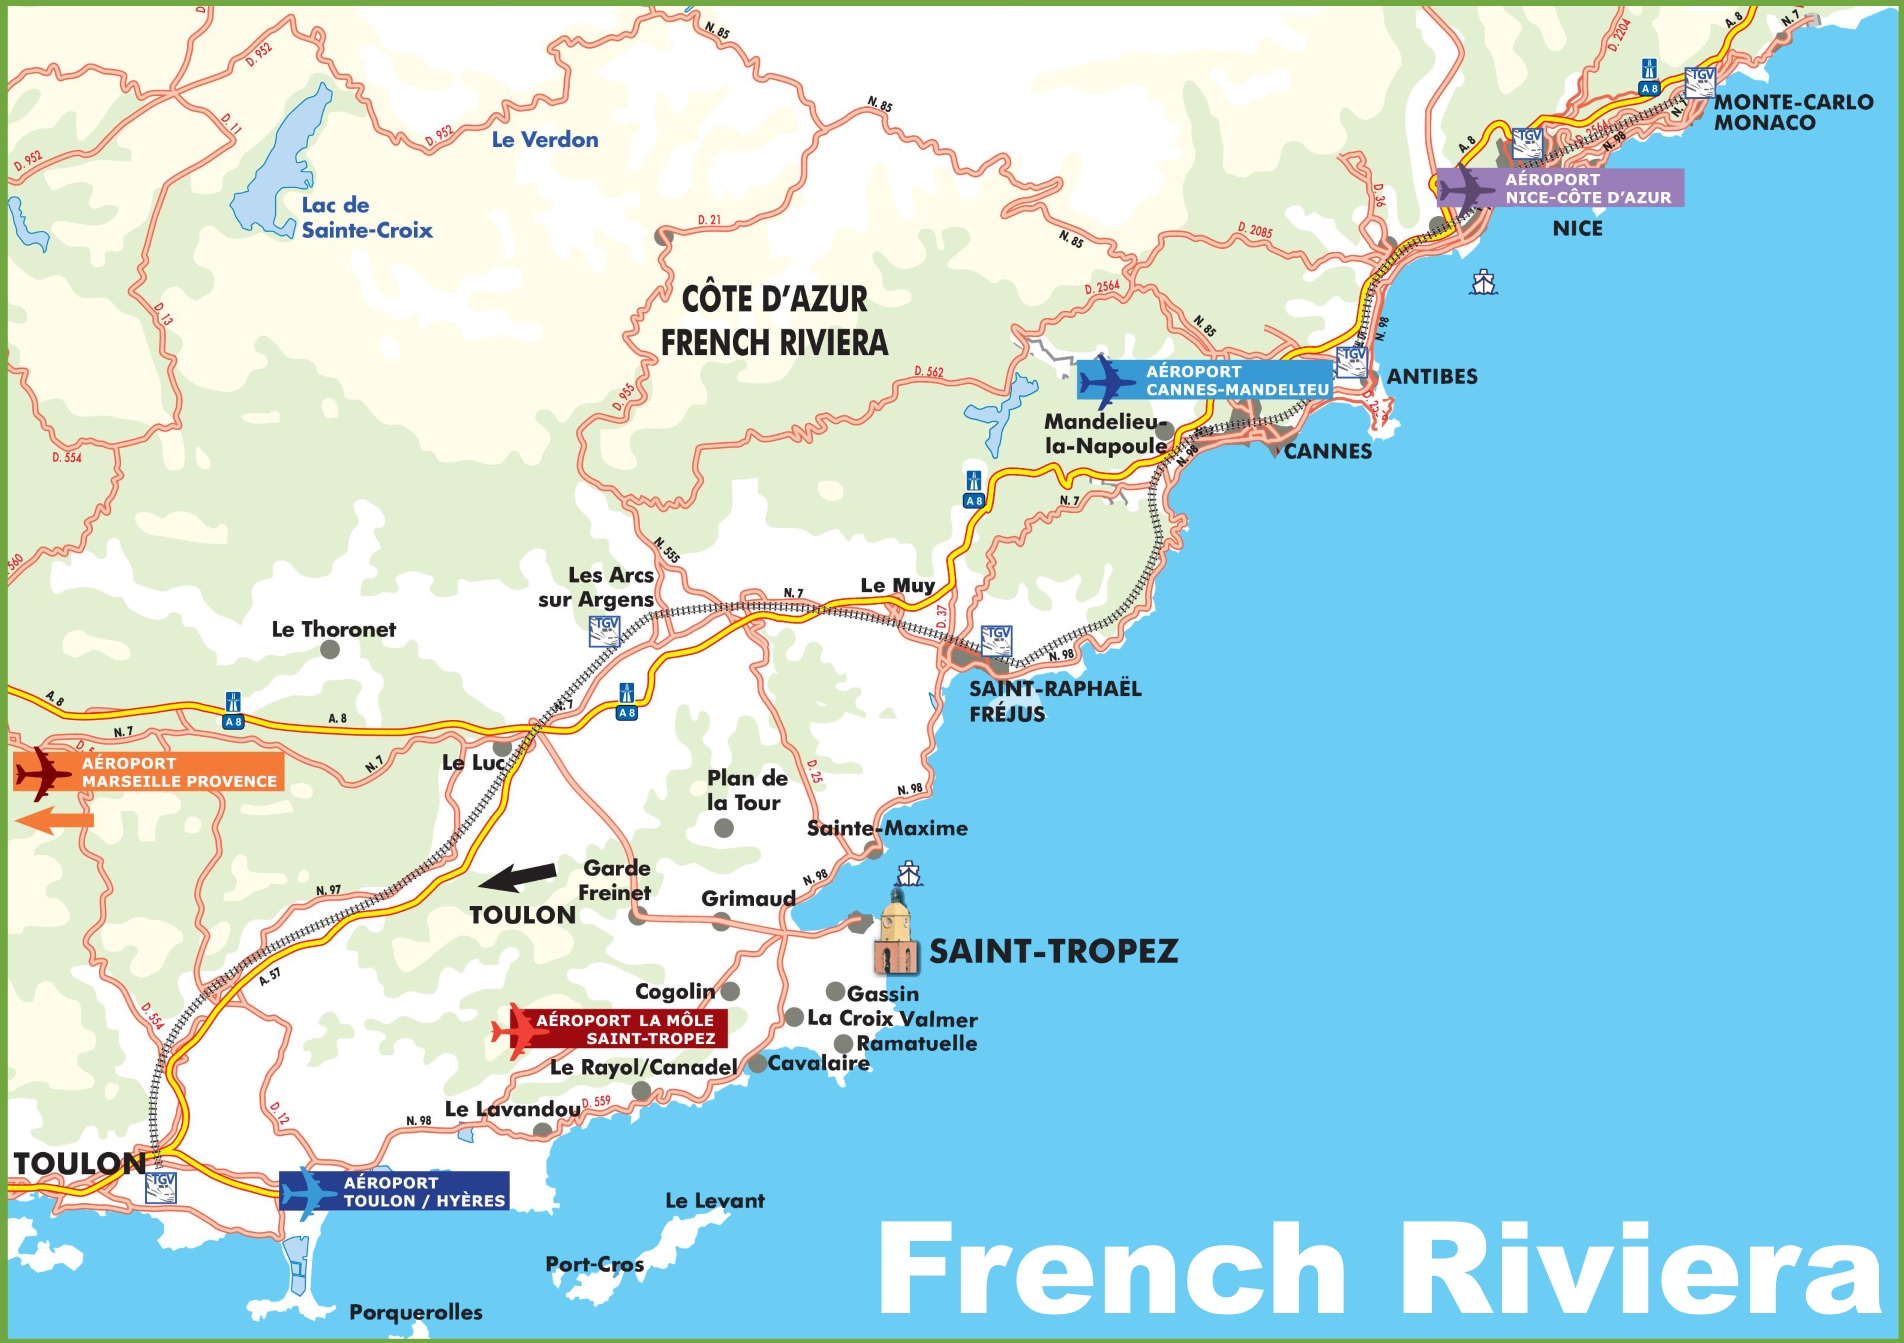 Map of French Riviera with cities and towns